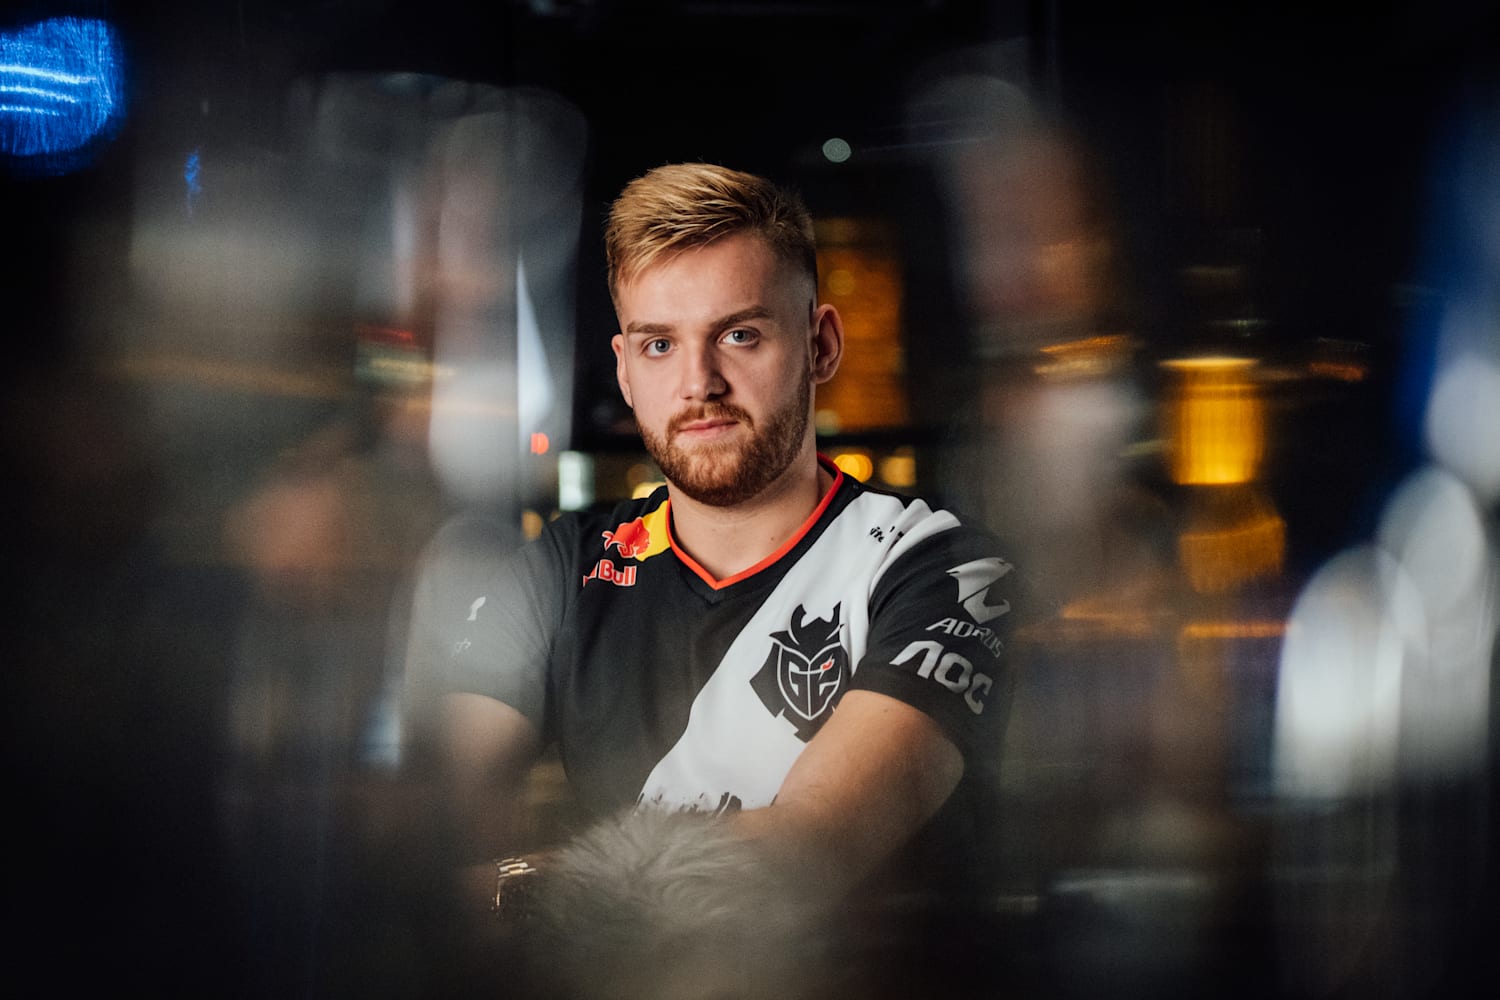 G2 NiKo garnered the 4th spot on last year’s “HLTV Top 20 CS:GO Players of the Year”